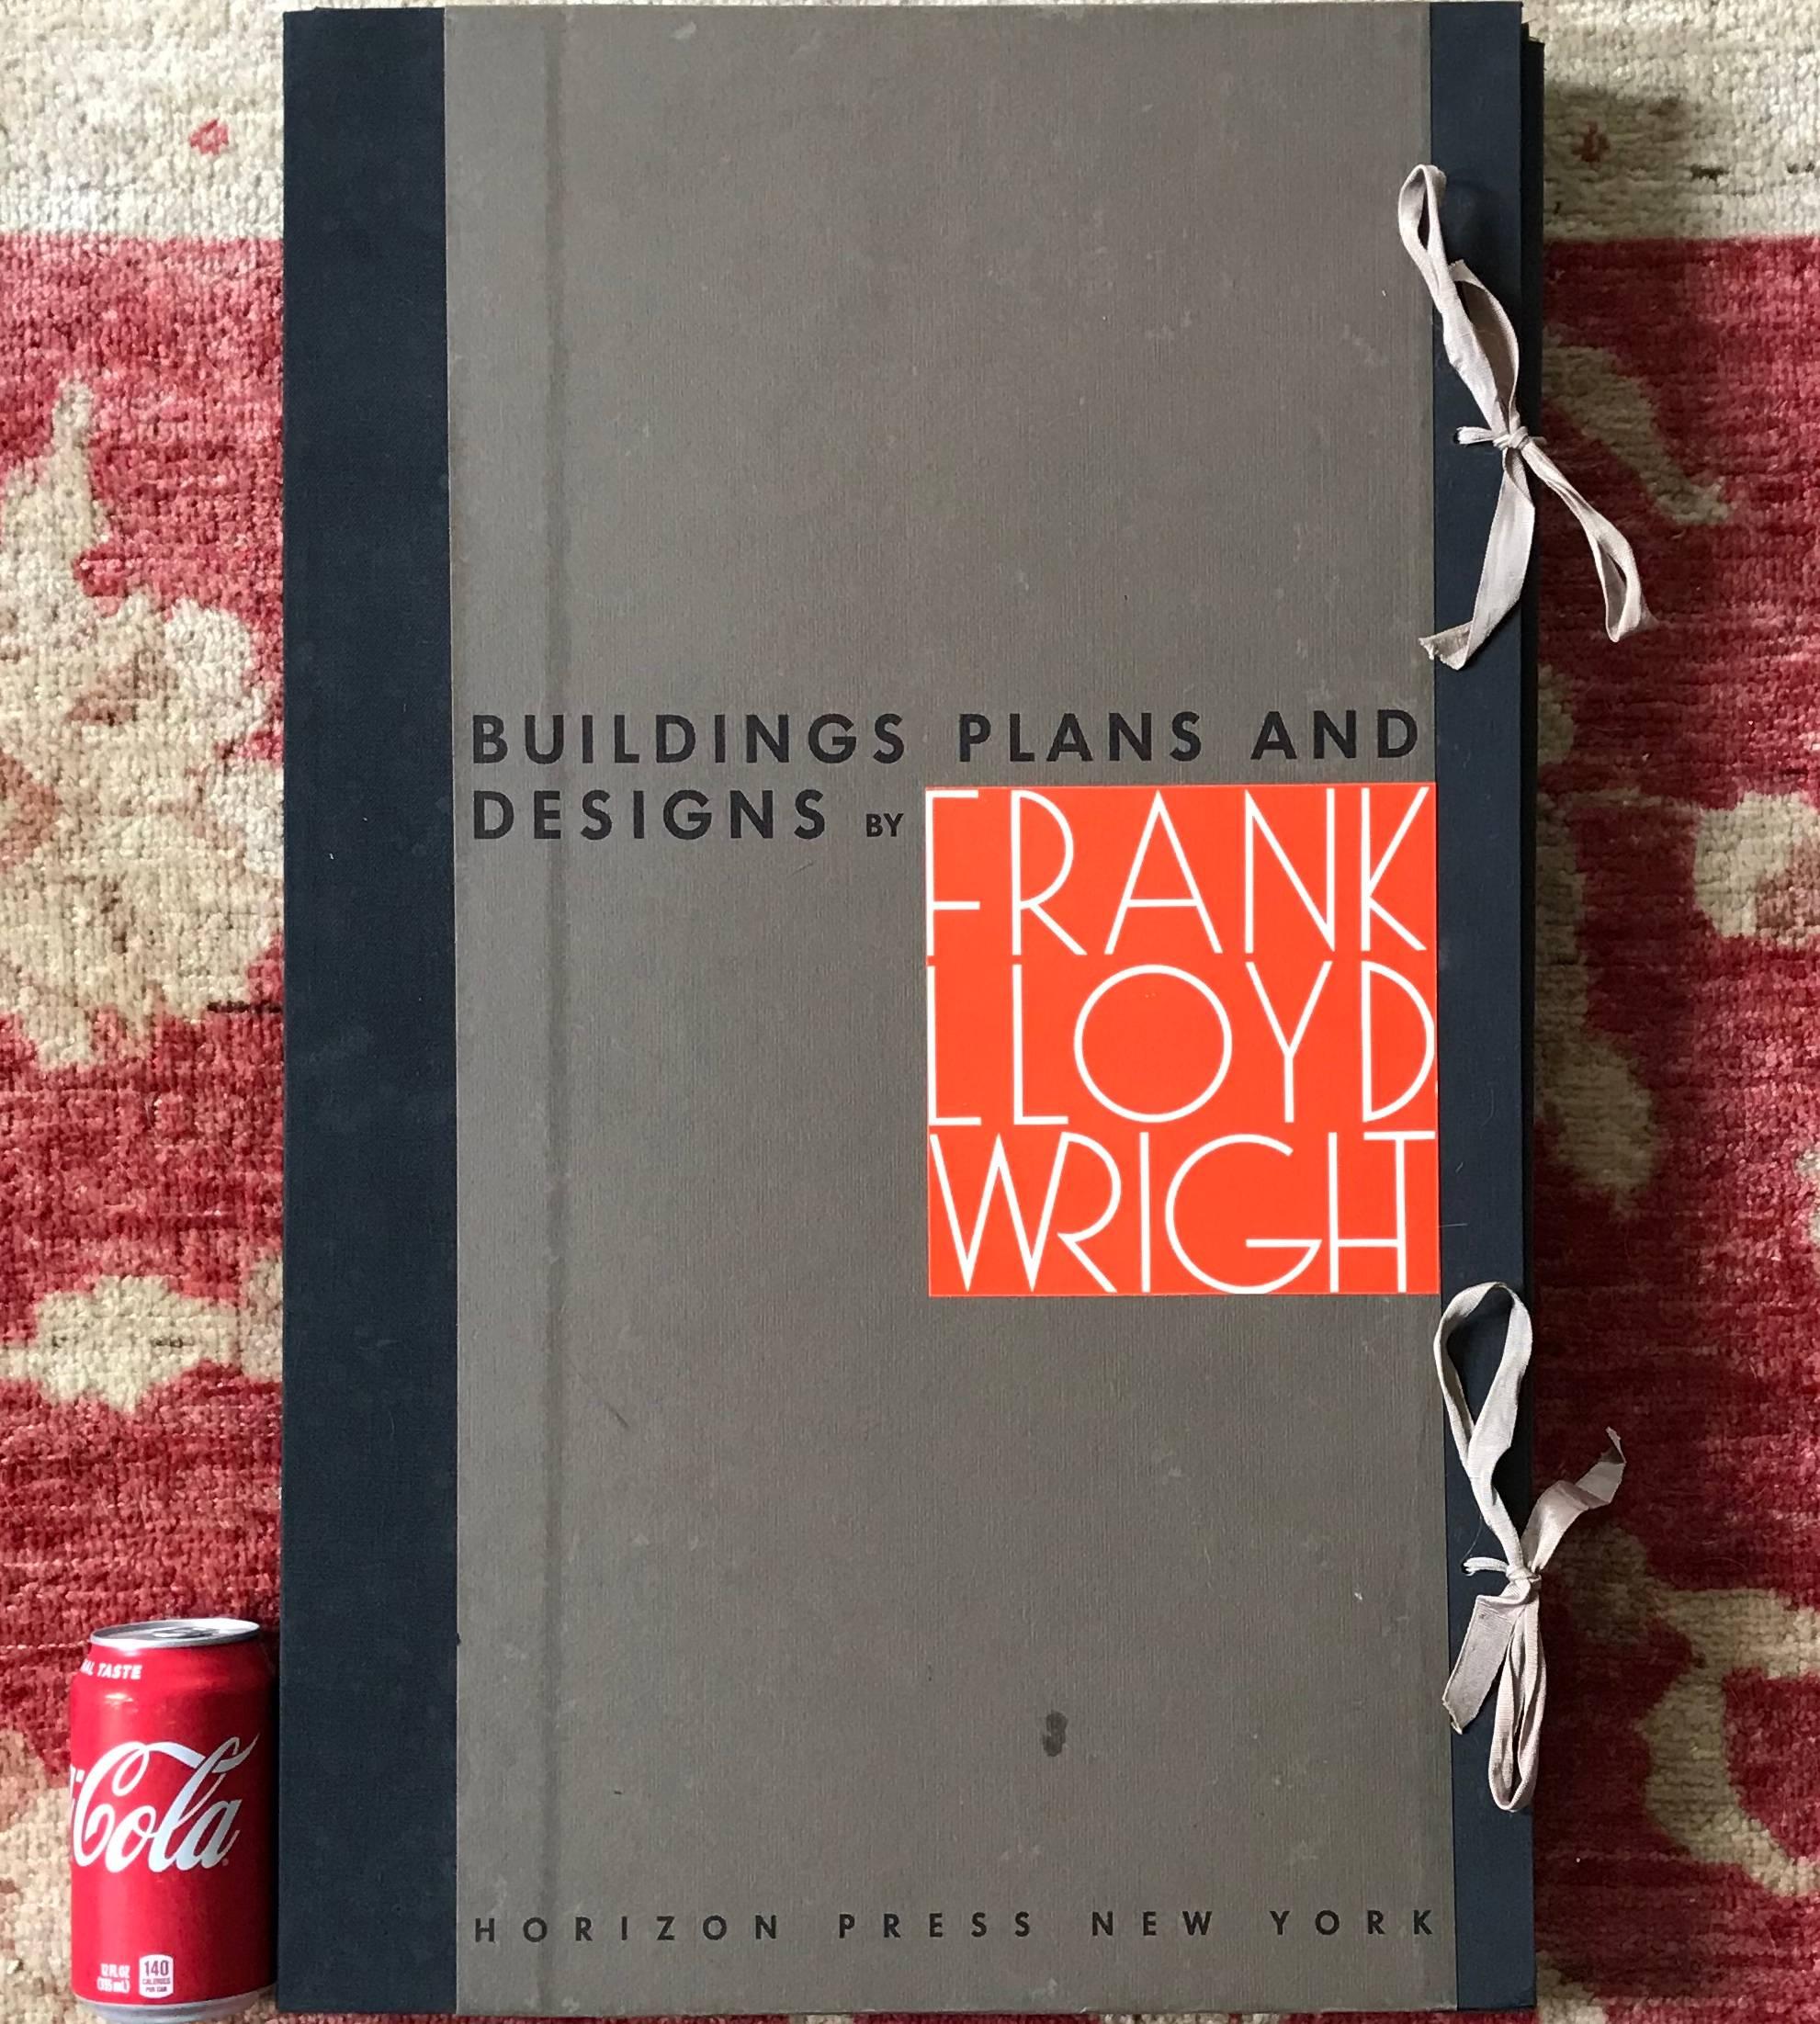 This is an enormous booklet (25.75 X 16 Inches): Frank Lloyd wright buildings, plans and designs.  100 Large scale plate drawings and plans on quality wove paper by Frank Lloyd Wright, all loose as issued in cloth and board portfolio. Including